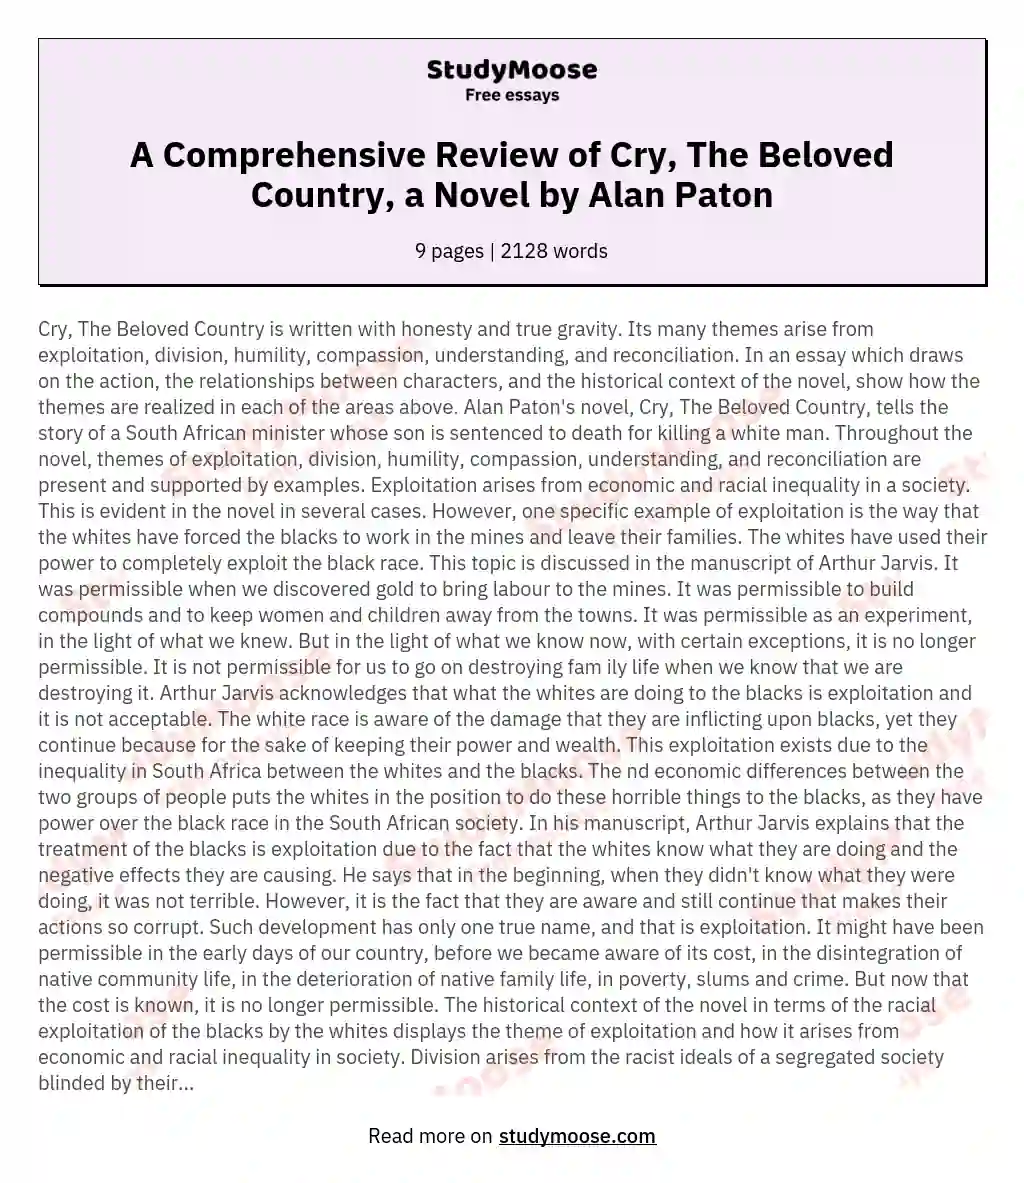 A Comprehensive Review of Cry, The Beloved Country, a Novel by Alan Paton